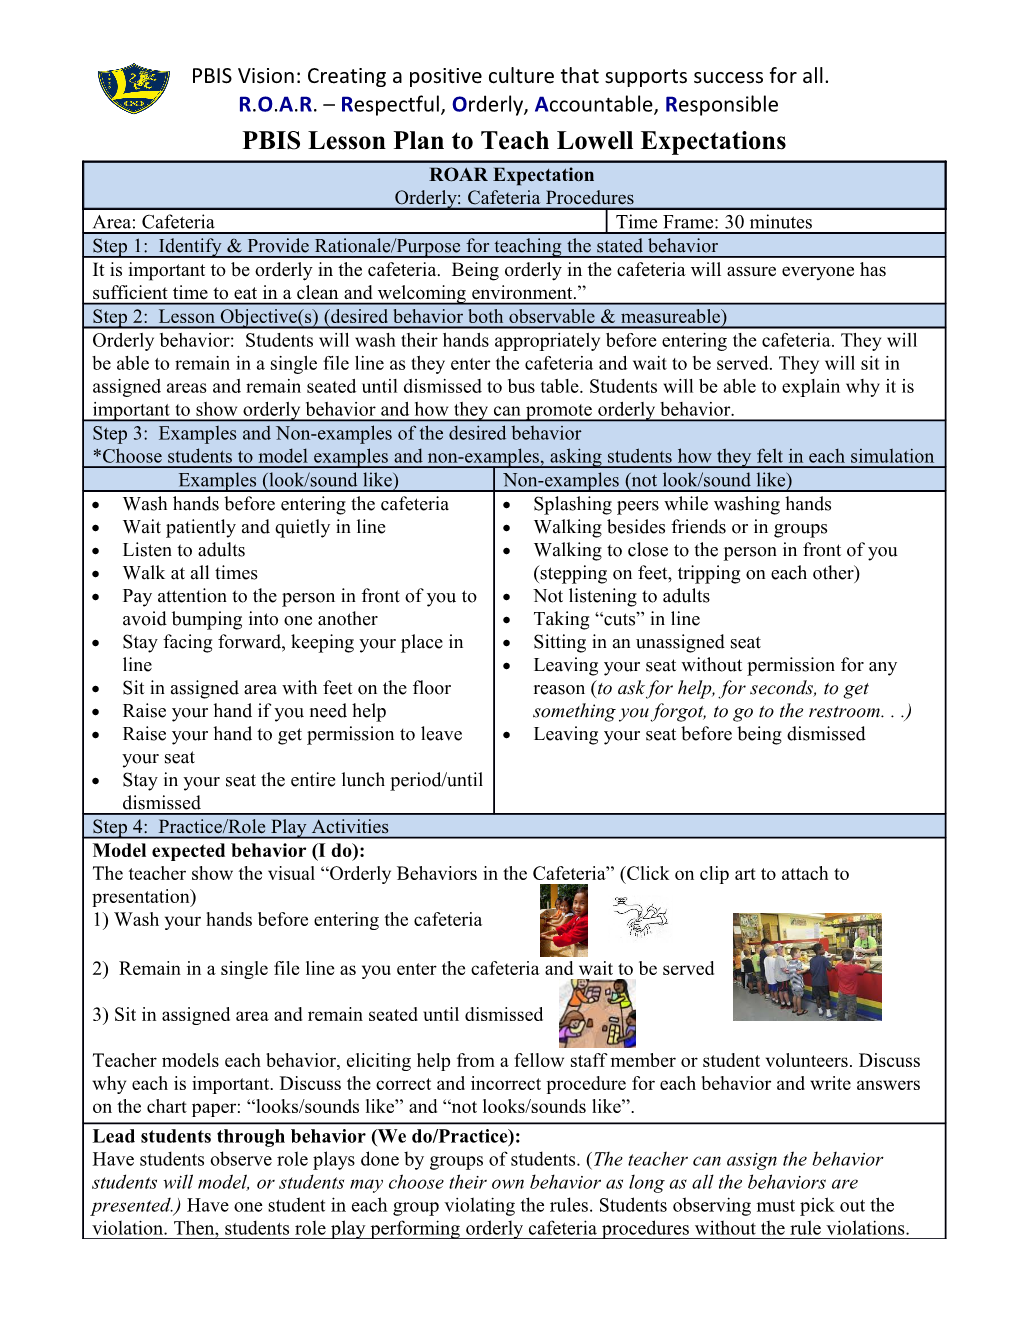 PBIS Lesson Plan to Teach Lowell Expectations